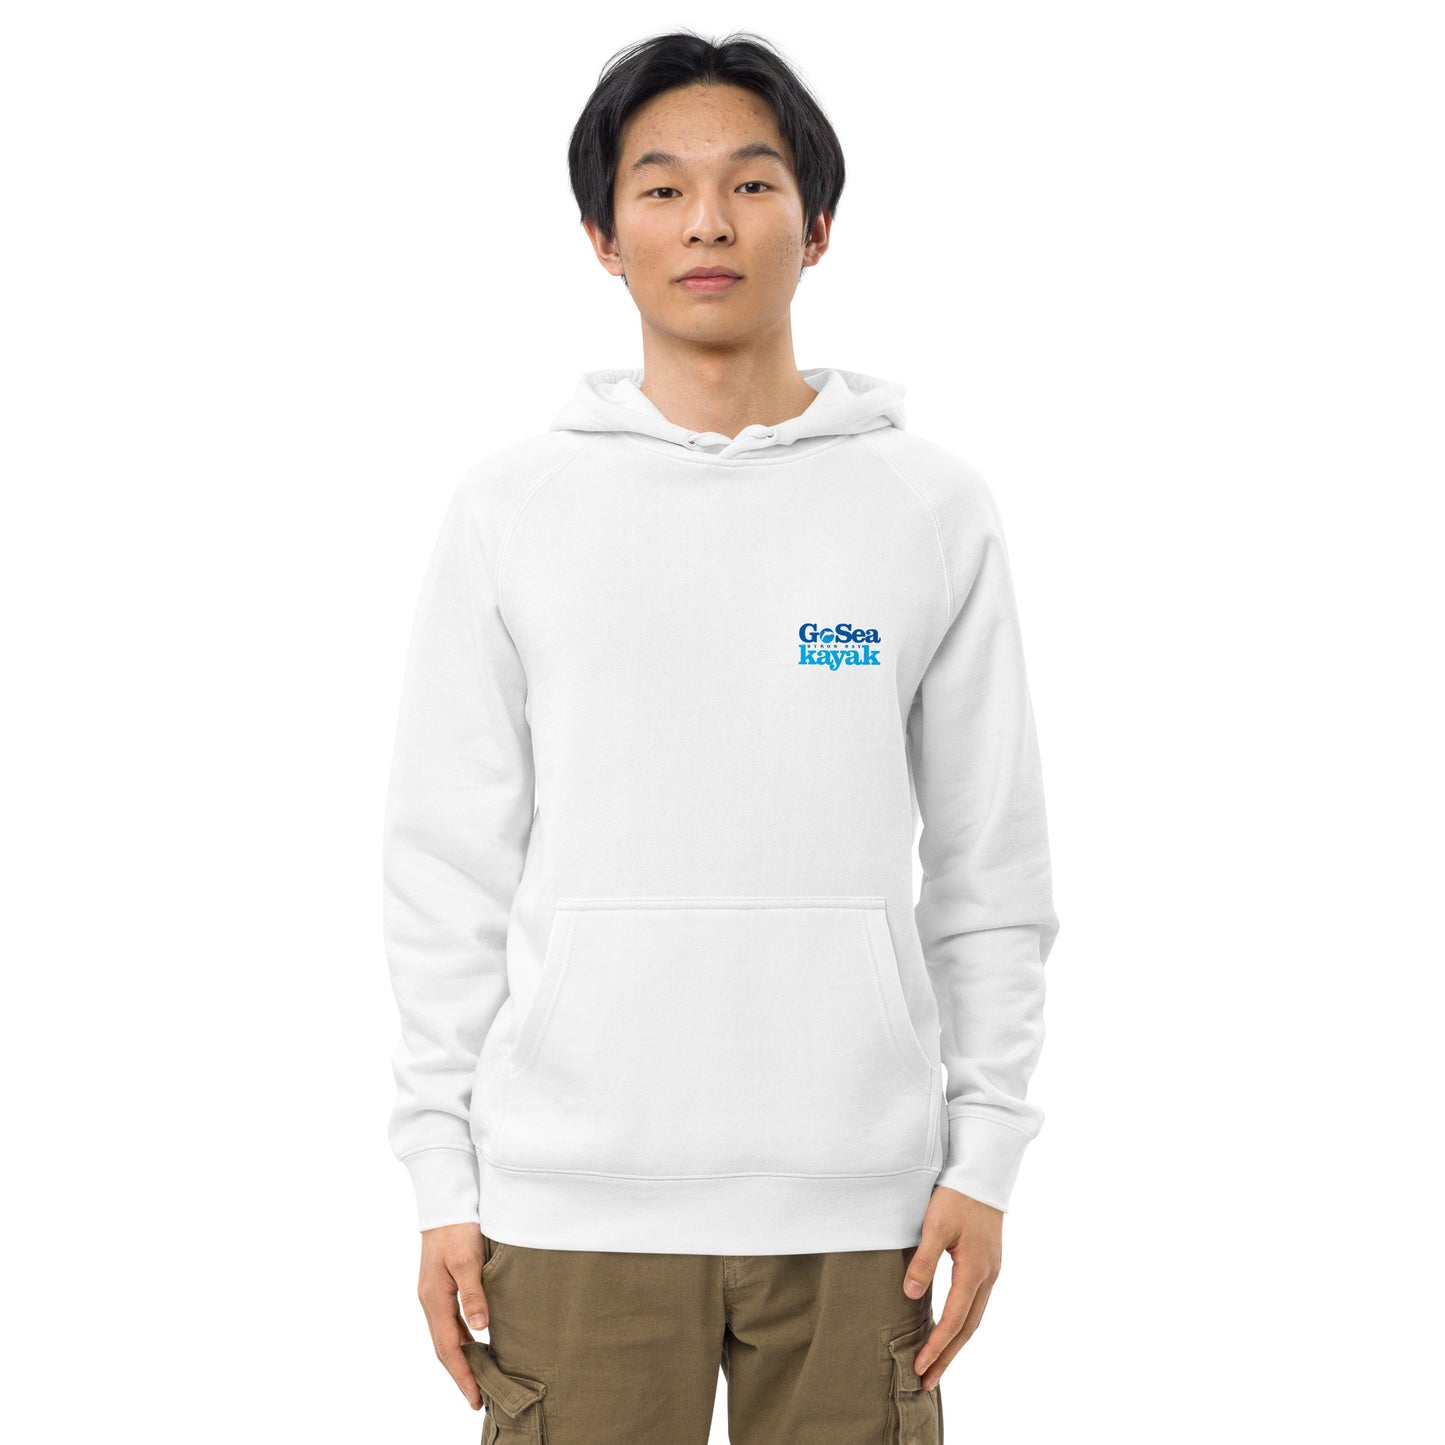  Unisex Hoodie - White - Front view being warn by man with arms by side - Go Sea Kayak Byron Bay logo on back and front, Kangaroo pocket on front - Genuine Byron Bay Merchandise | Produced by Go Sea Kayak Byron Bay 